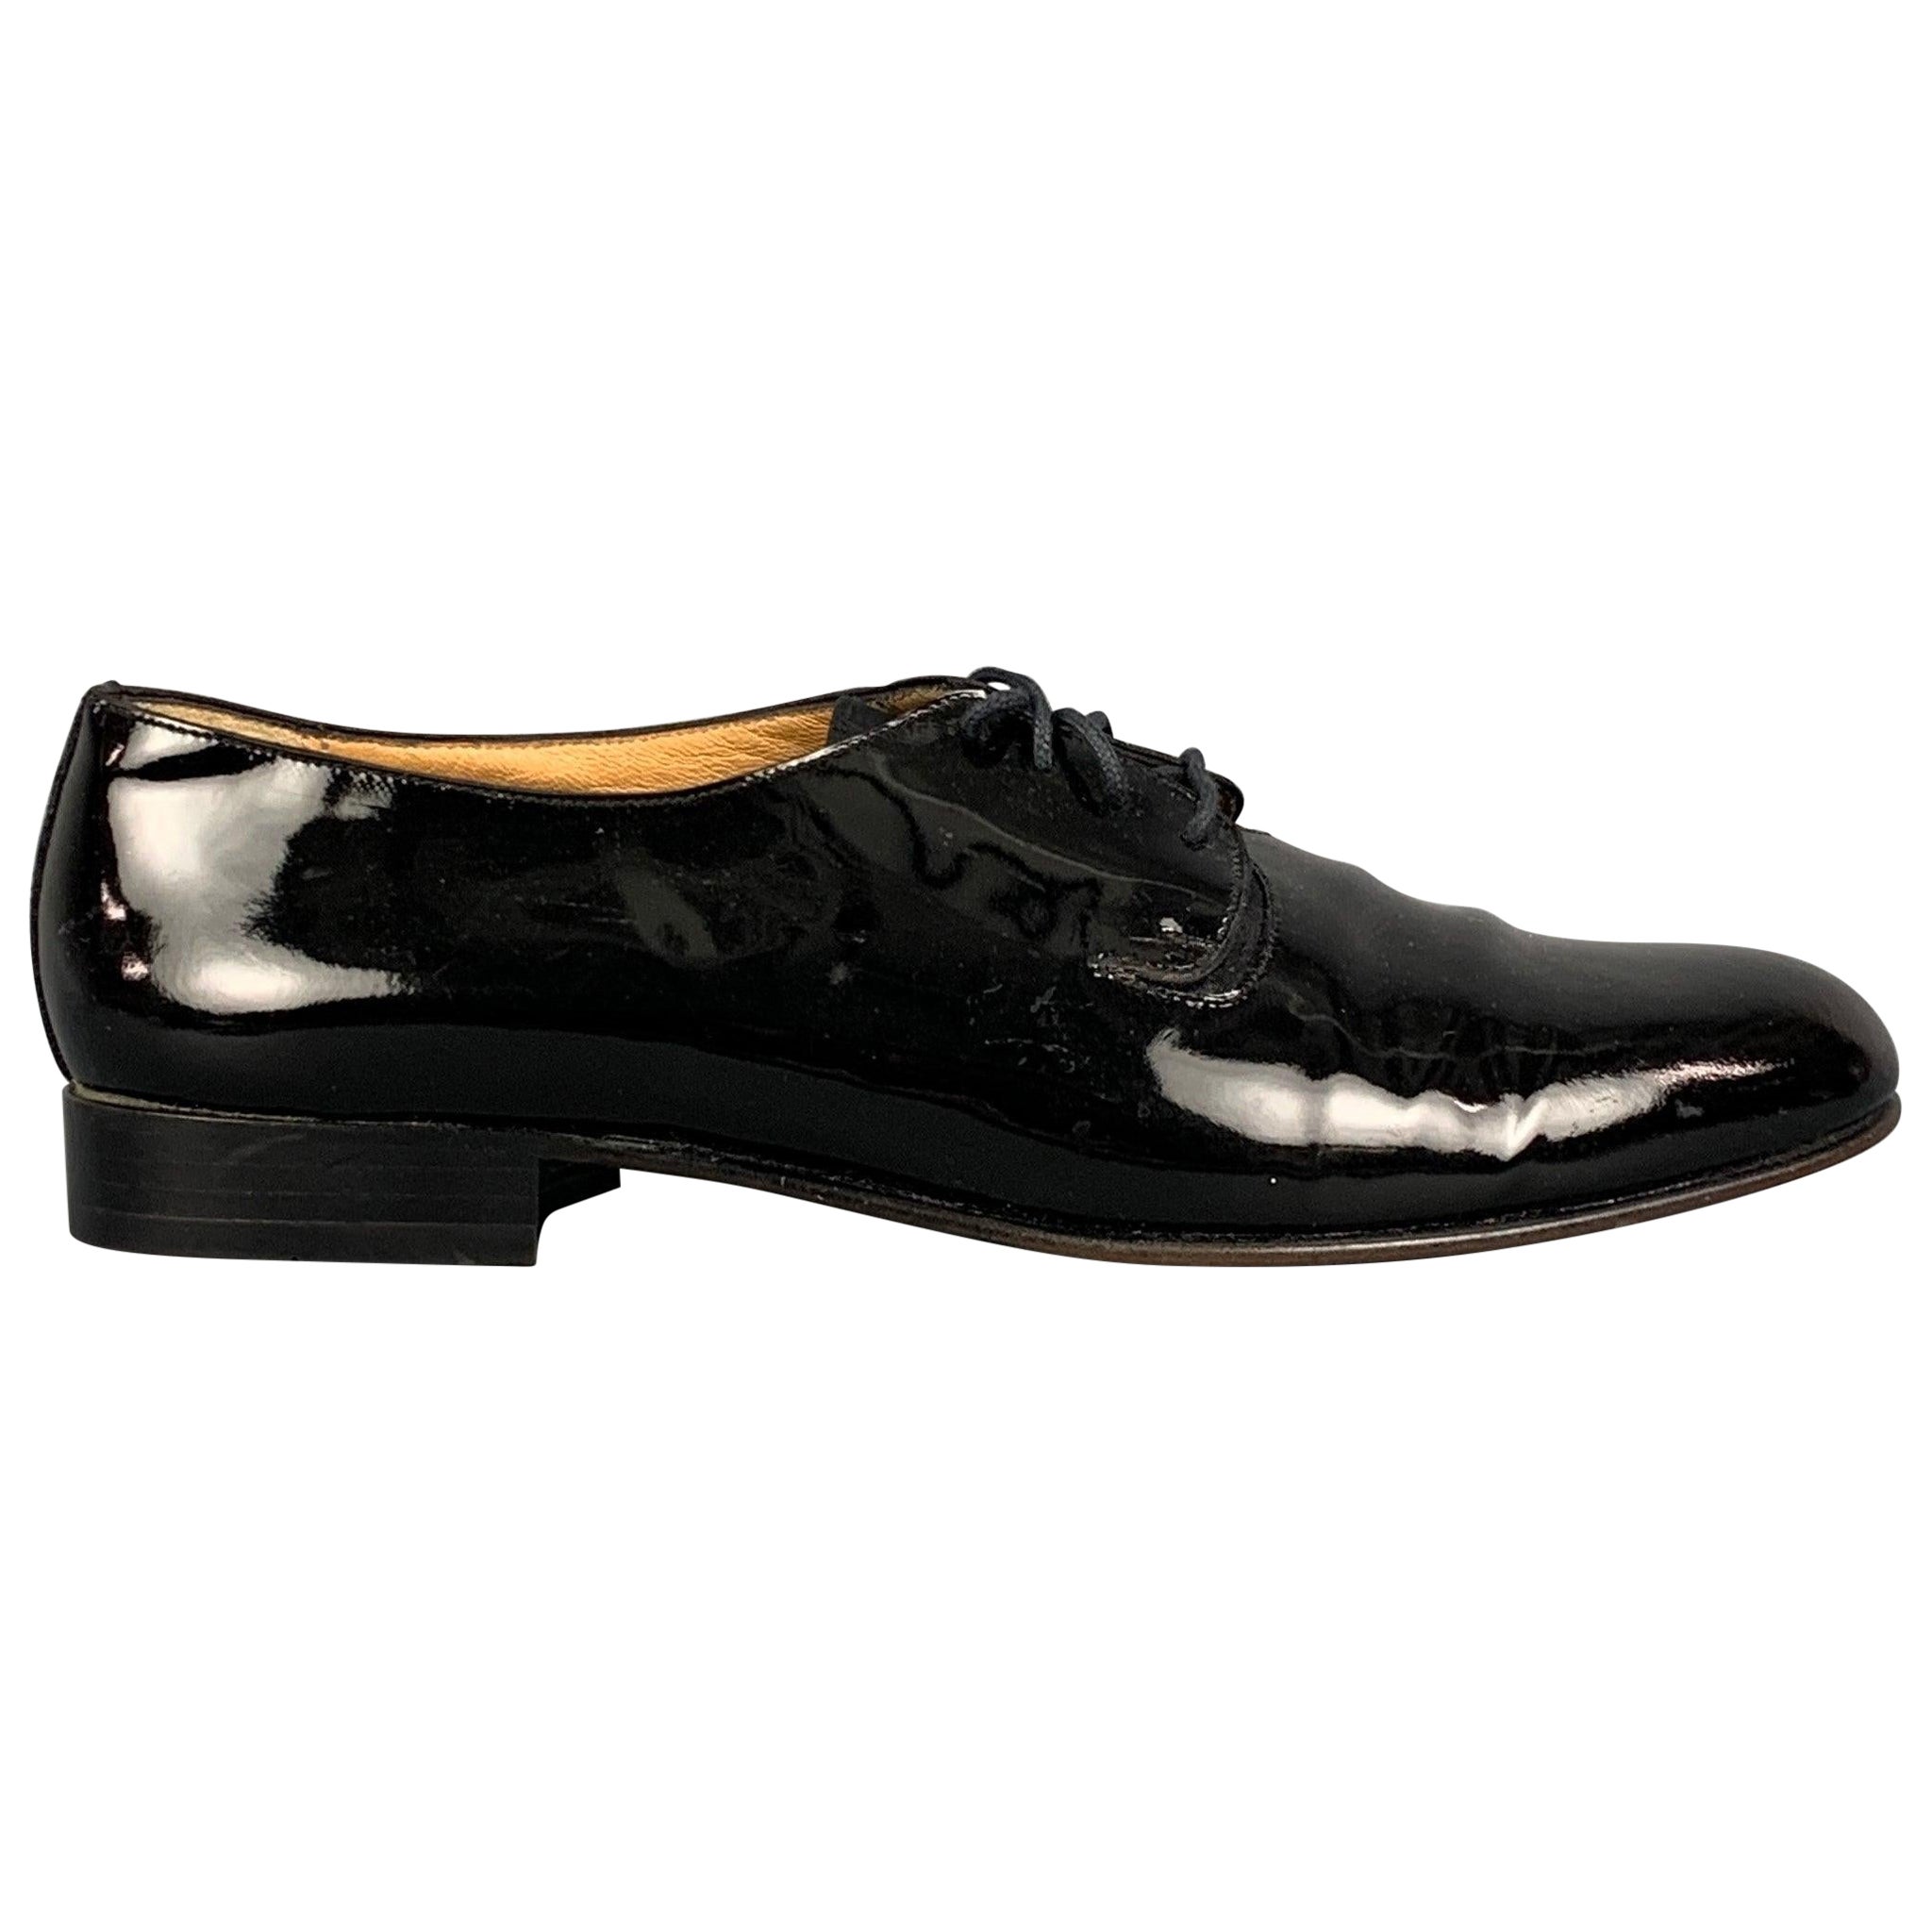 BALLY Bice Size 8 Black Patent Leather Lace Up Shoes For Sale